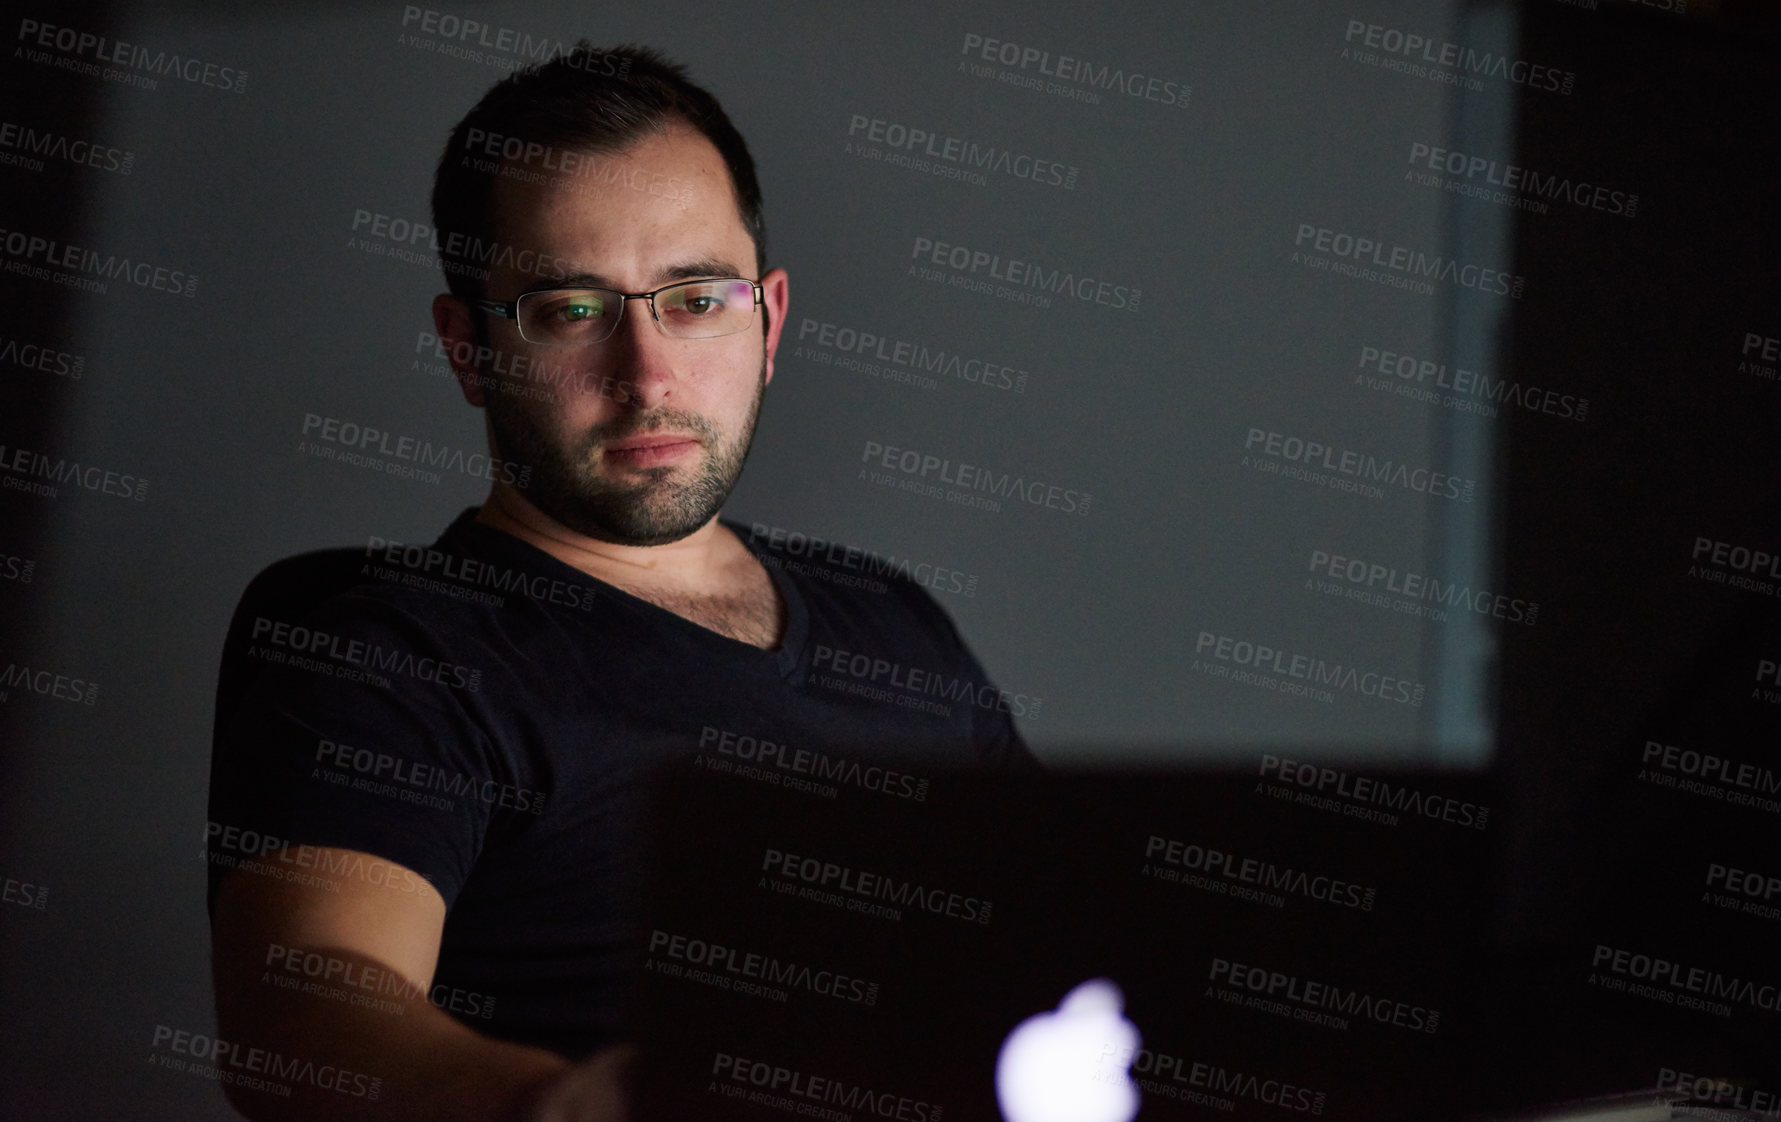 Buy stock photo Cropped shot of a young man working late in his office